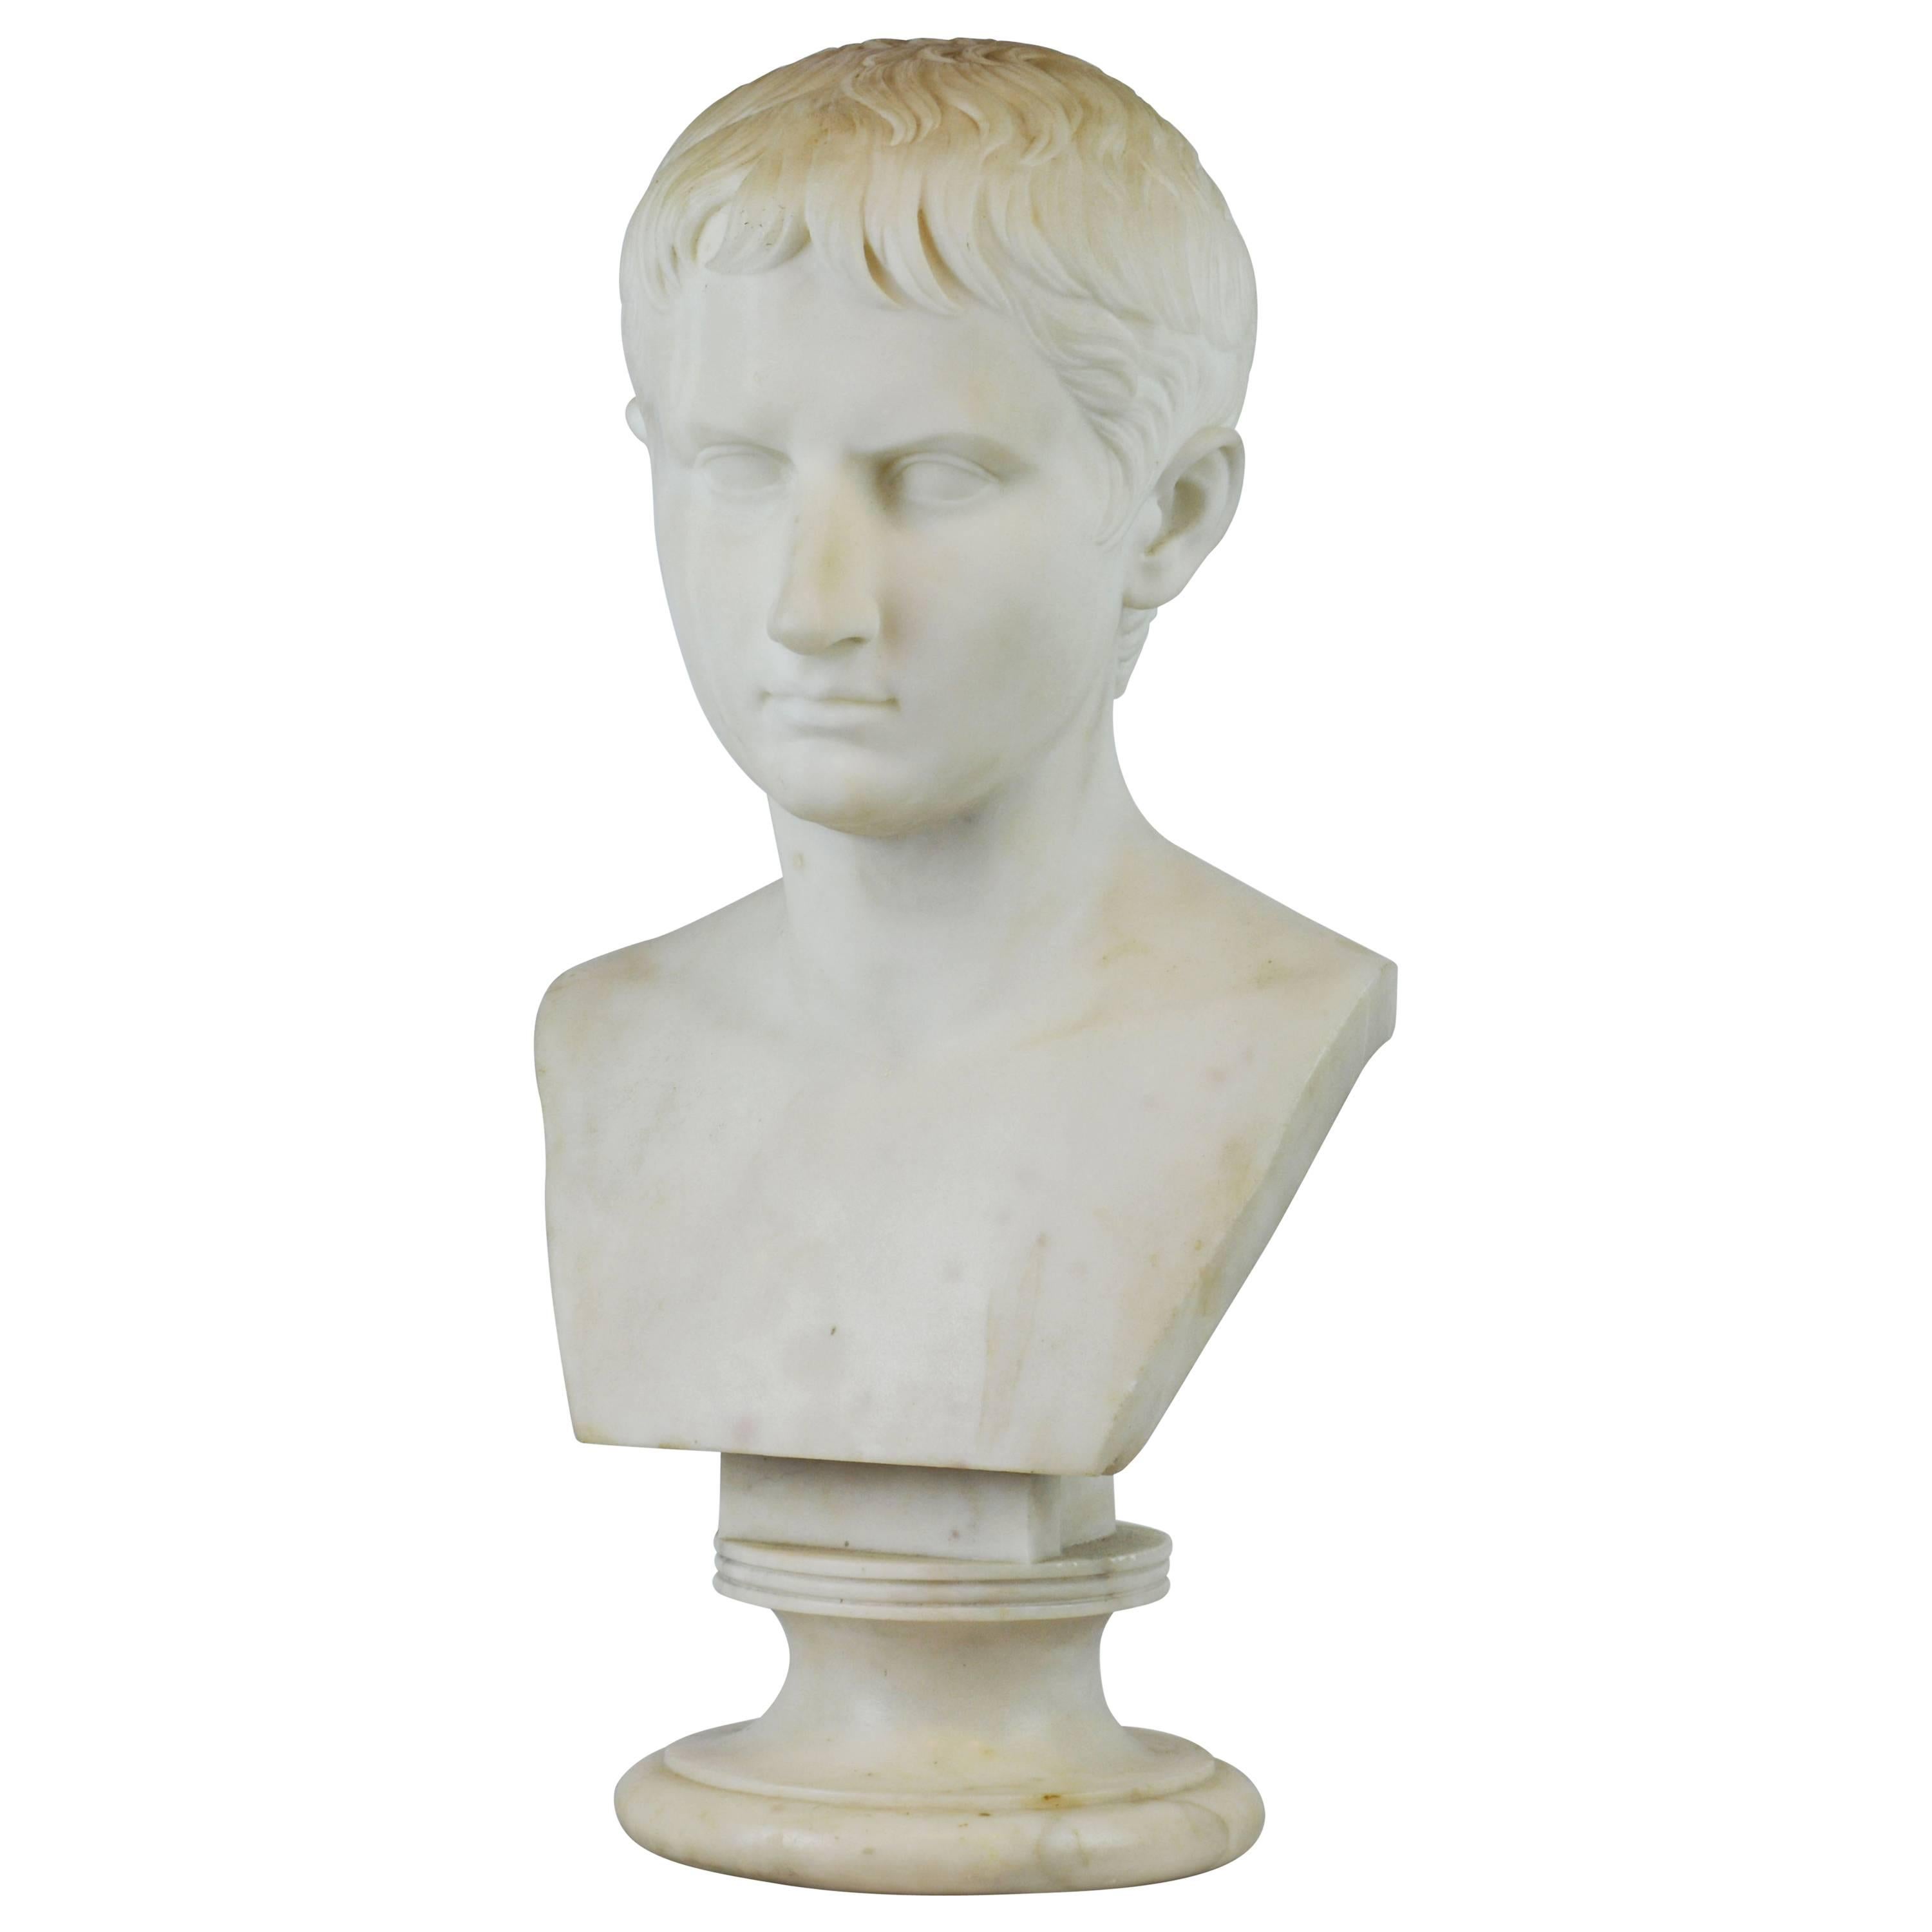 19th Century Carved Marble Bust of Young Octavian, Later Emperor Caesar Augustus